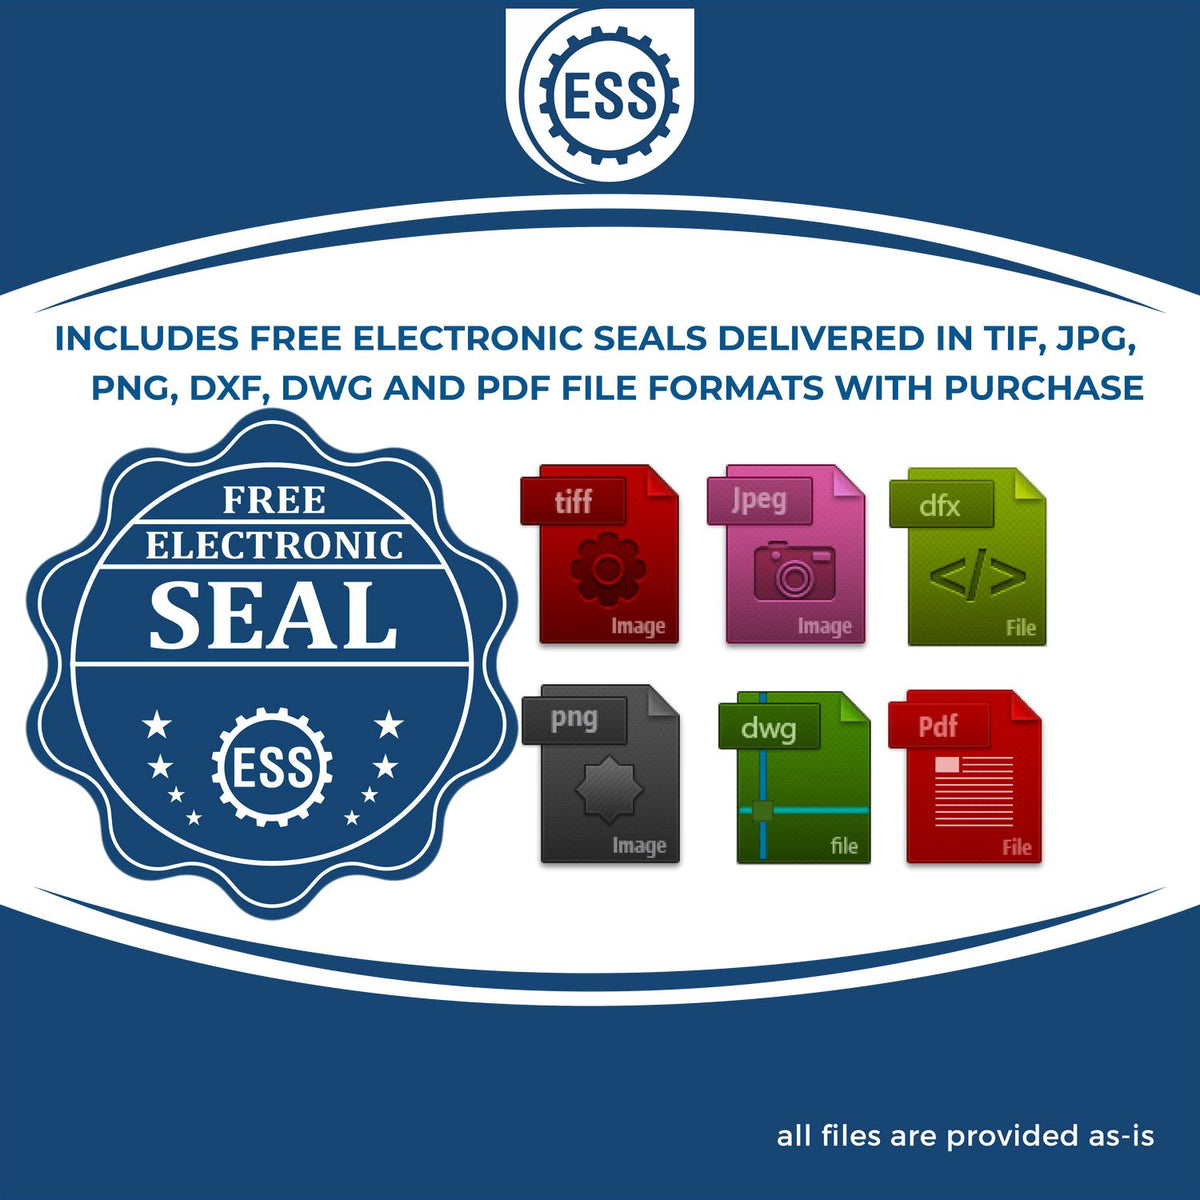 An infographic for the free electronic seal for the Gift New York Architect Seal illustrating the different file type icons such as DXF, DWG, TIF, JPG and PNG.